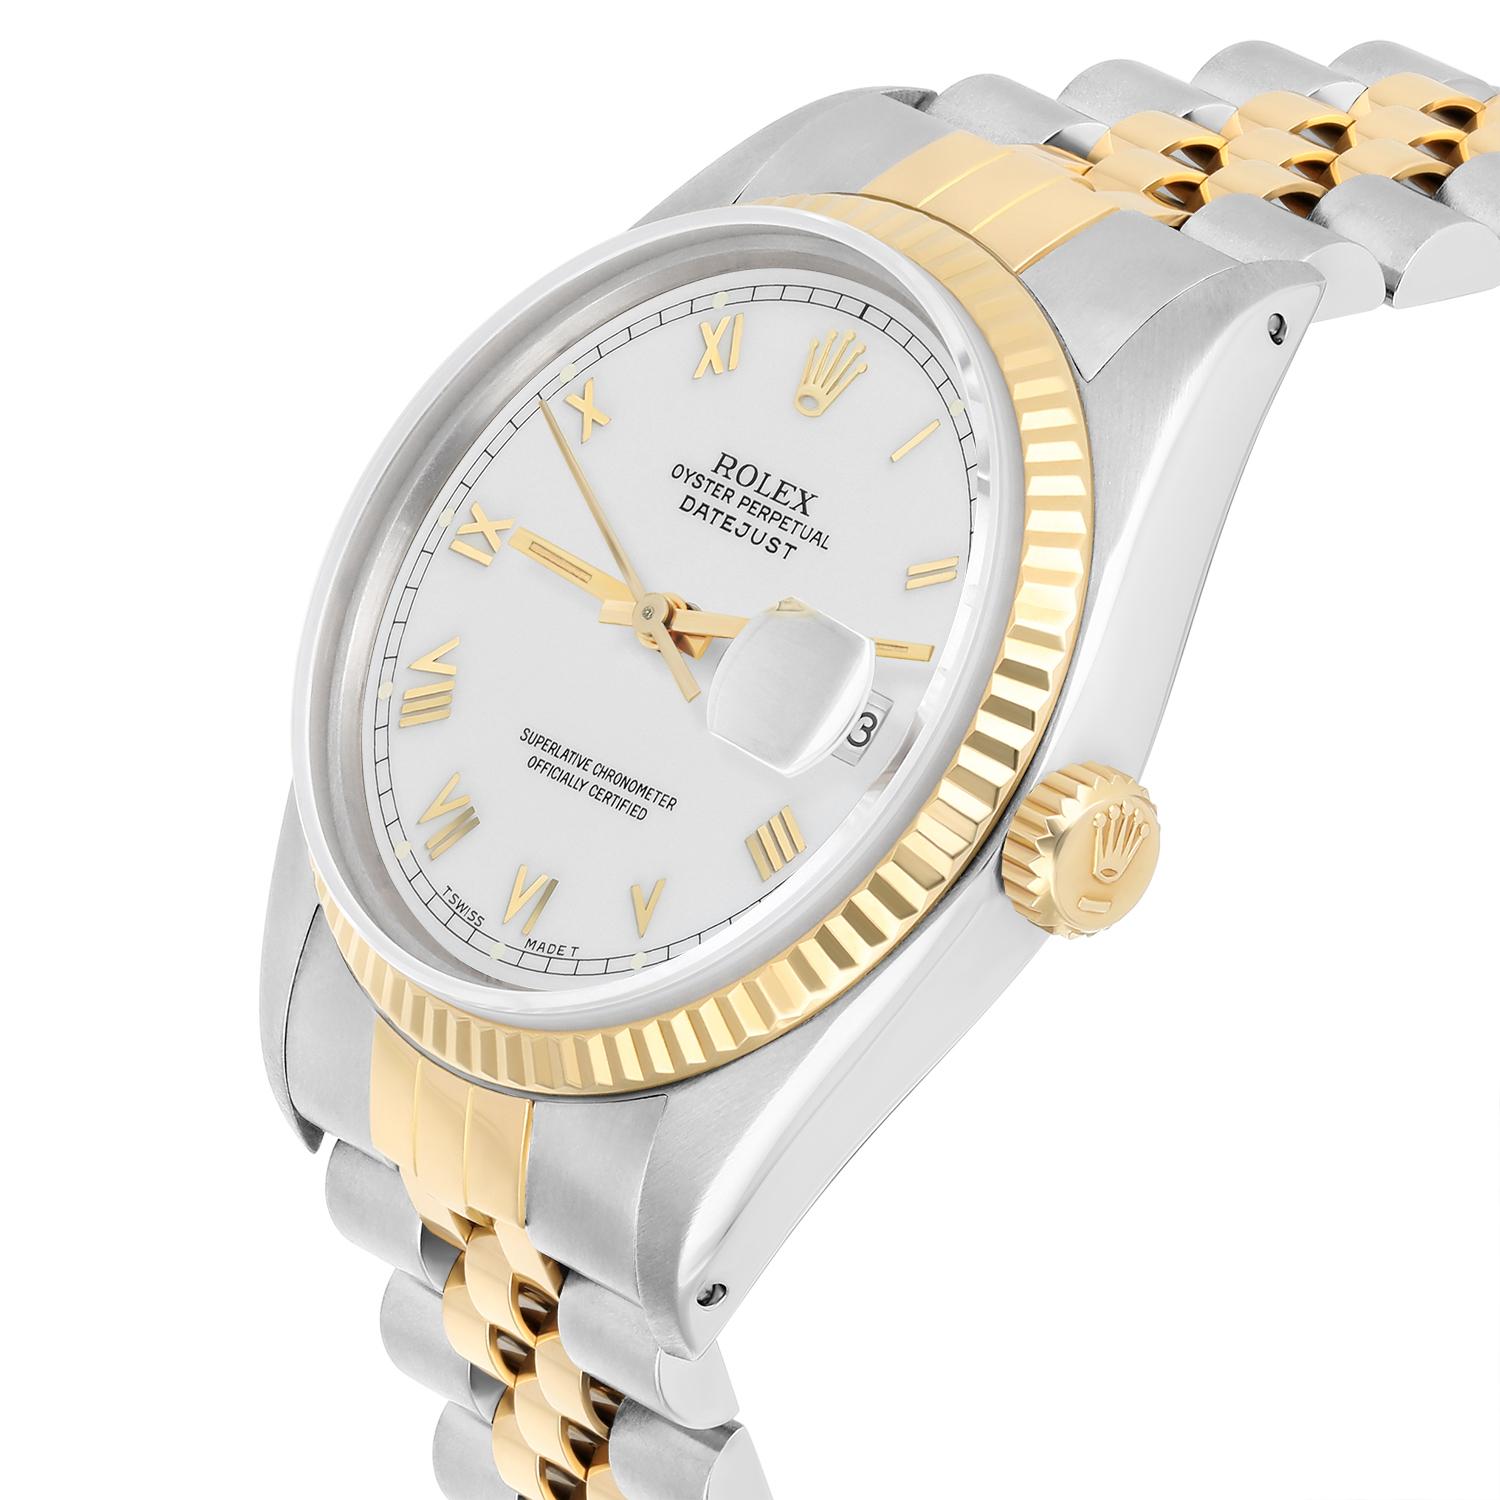 Rolex Datejust 36mm Two Tone White Roman Numeral Dial Jubilee 16013 Circa 1987 For Sale 1